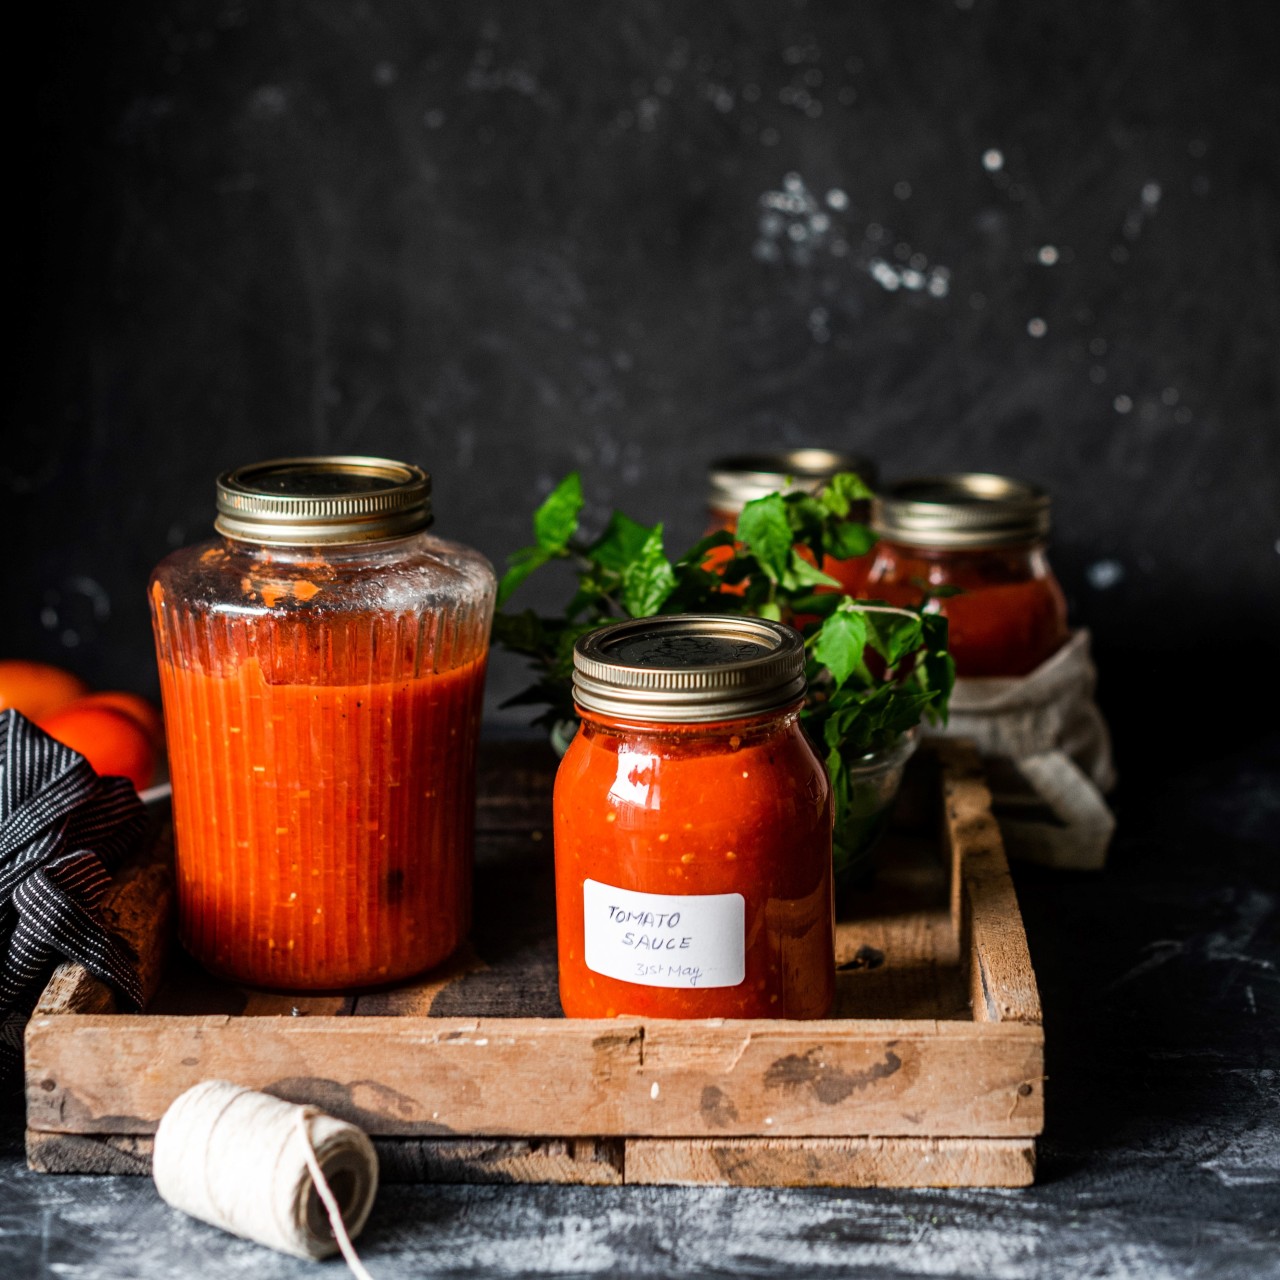 The Best Tomato Sauce Recipe
What are the features of the best sauce? It must be delicious, easy to prepare and versatile so you can use it in different dishes. And this is precisely how this sauce is :)
By Tastes of Health